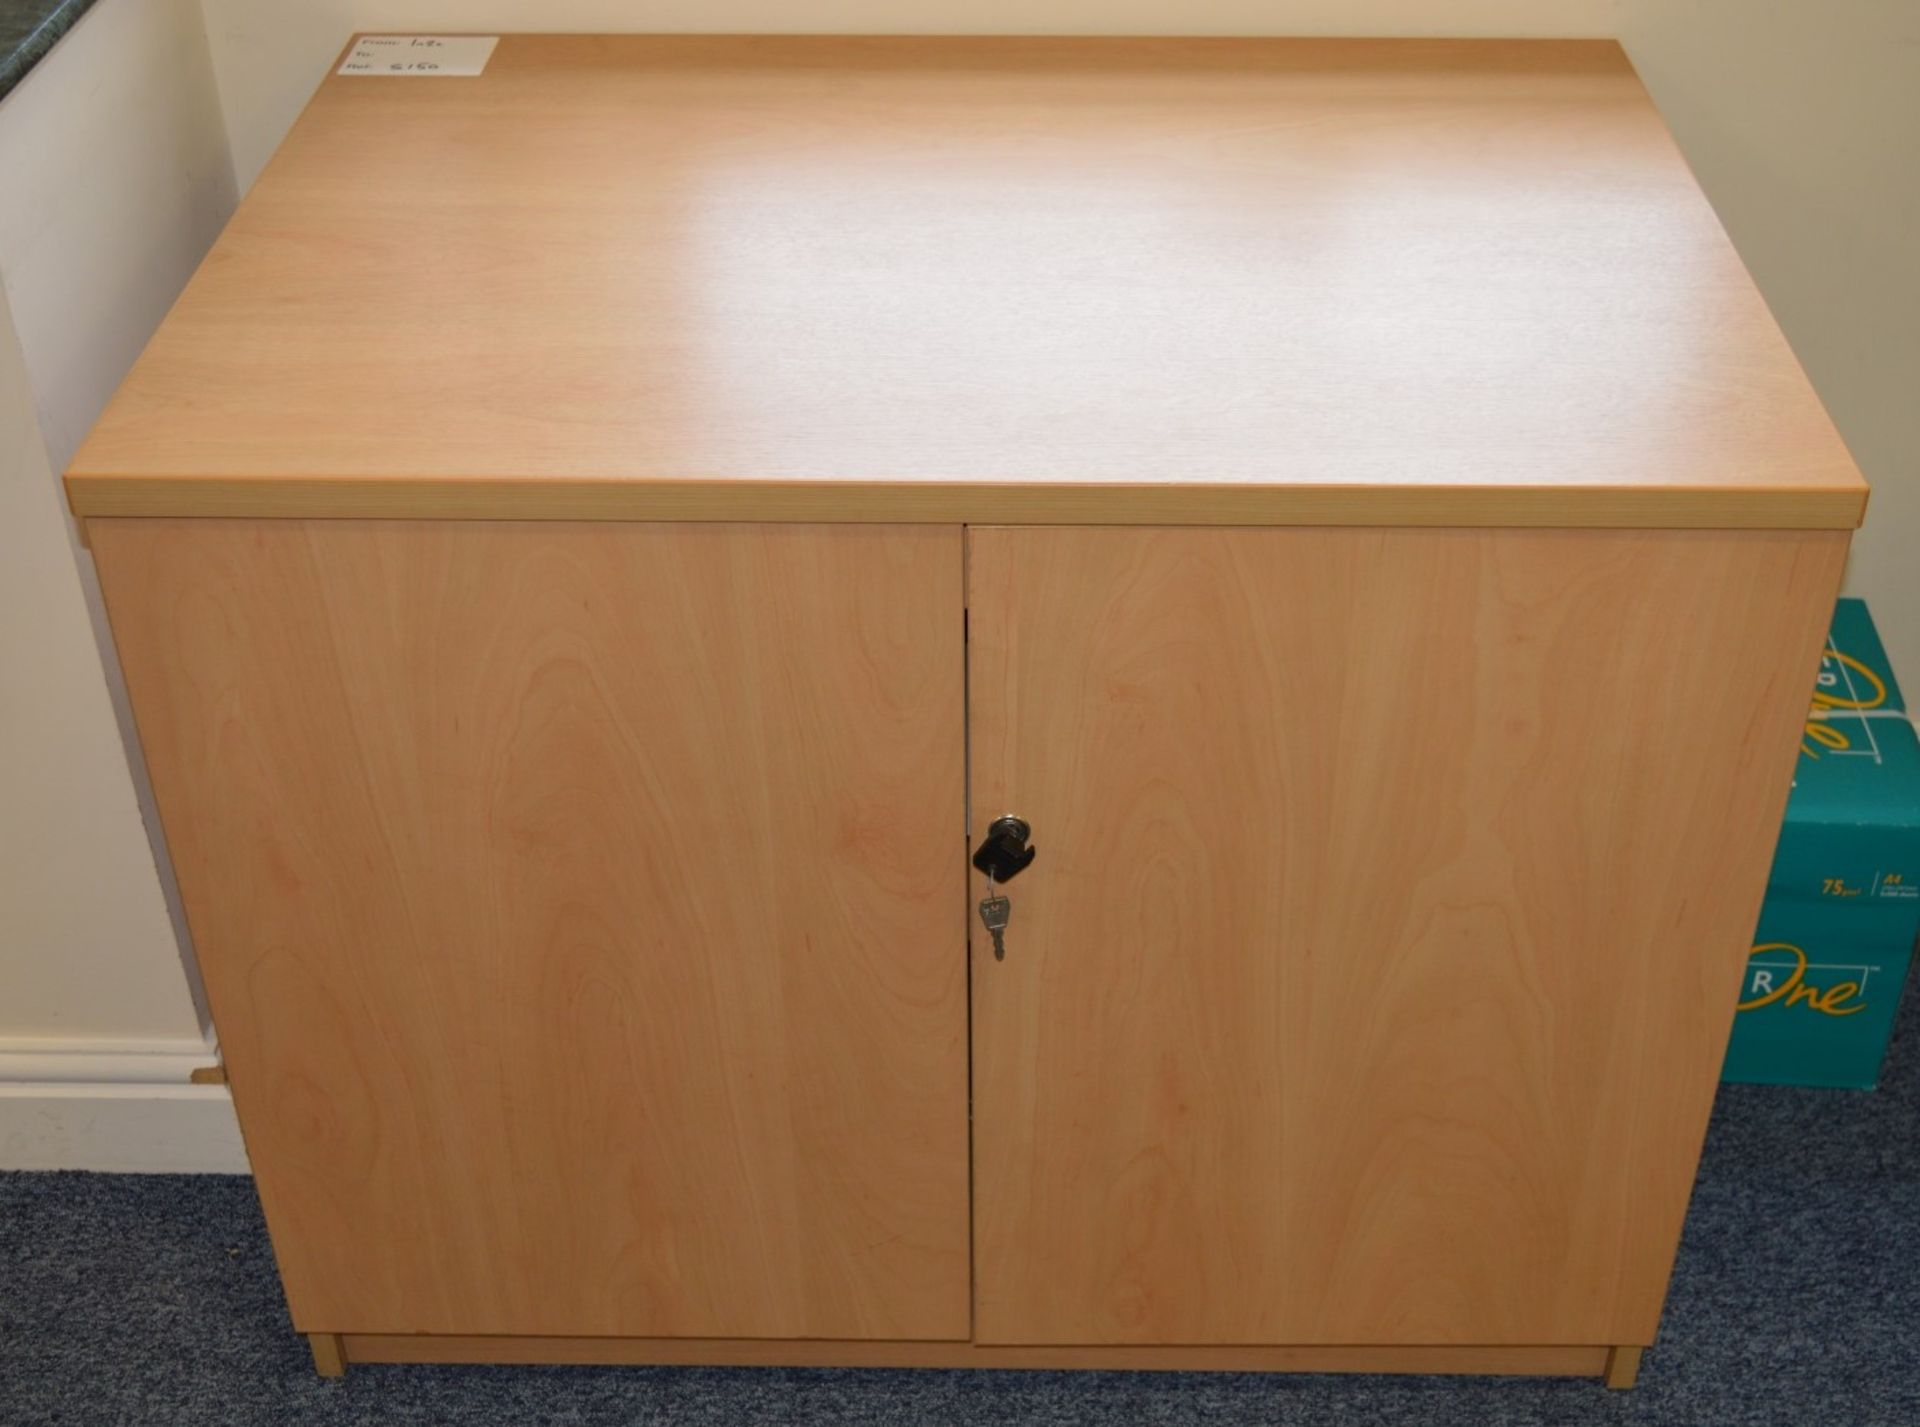 1 x Beech Office Storage Cabinet With Adjustable Internal Shelf and Key - CL300 - Ref S150 - H75 x